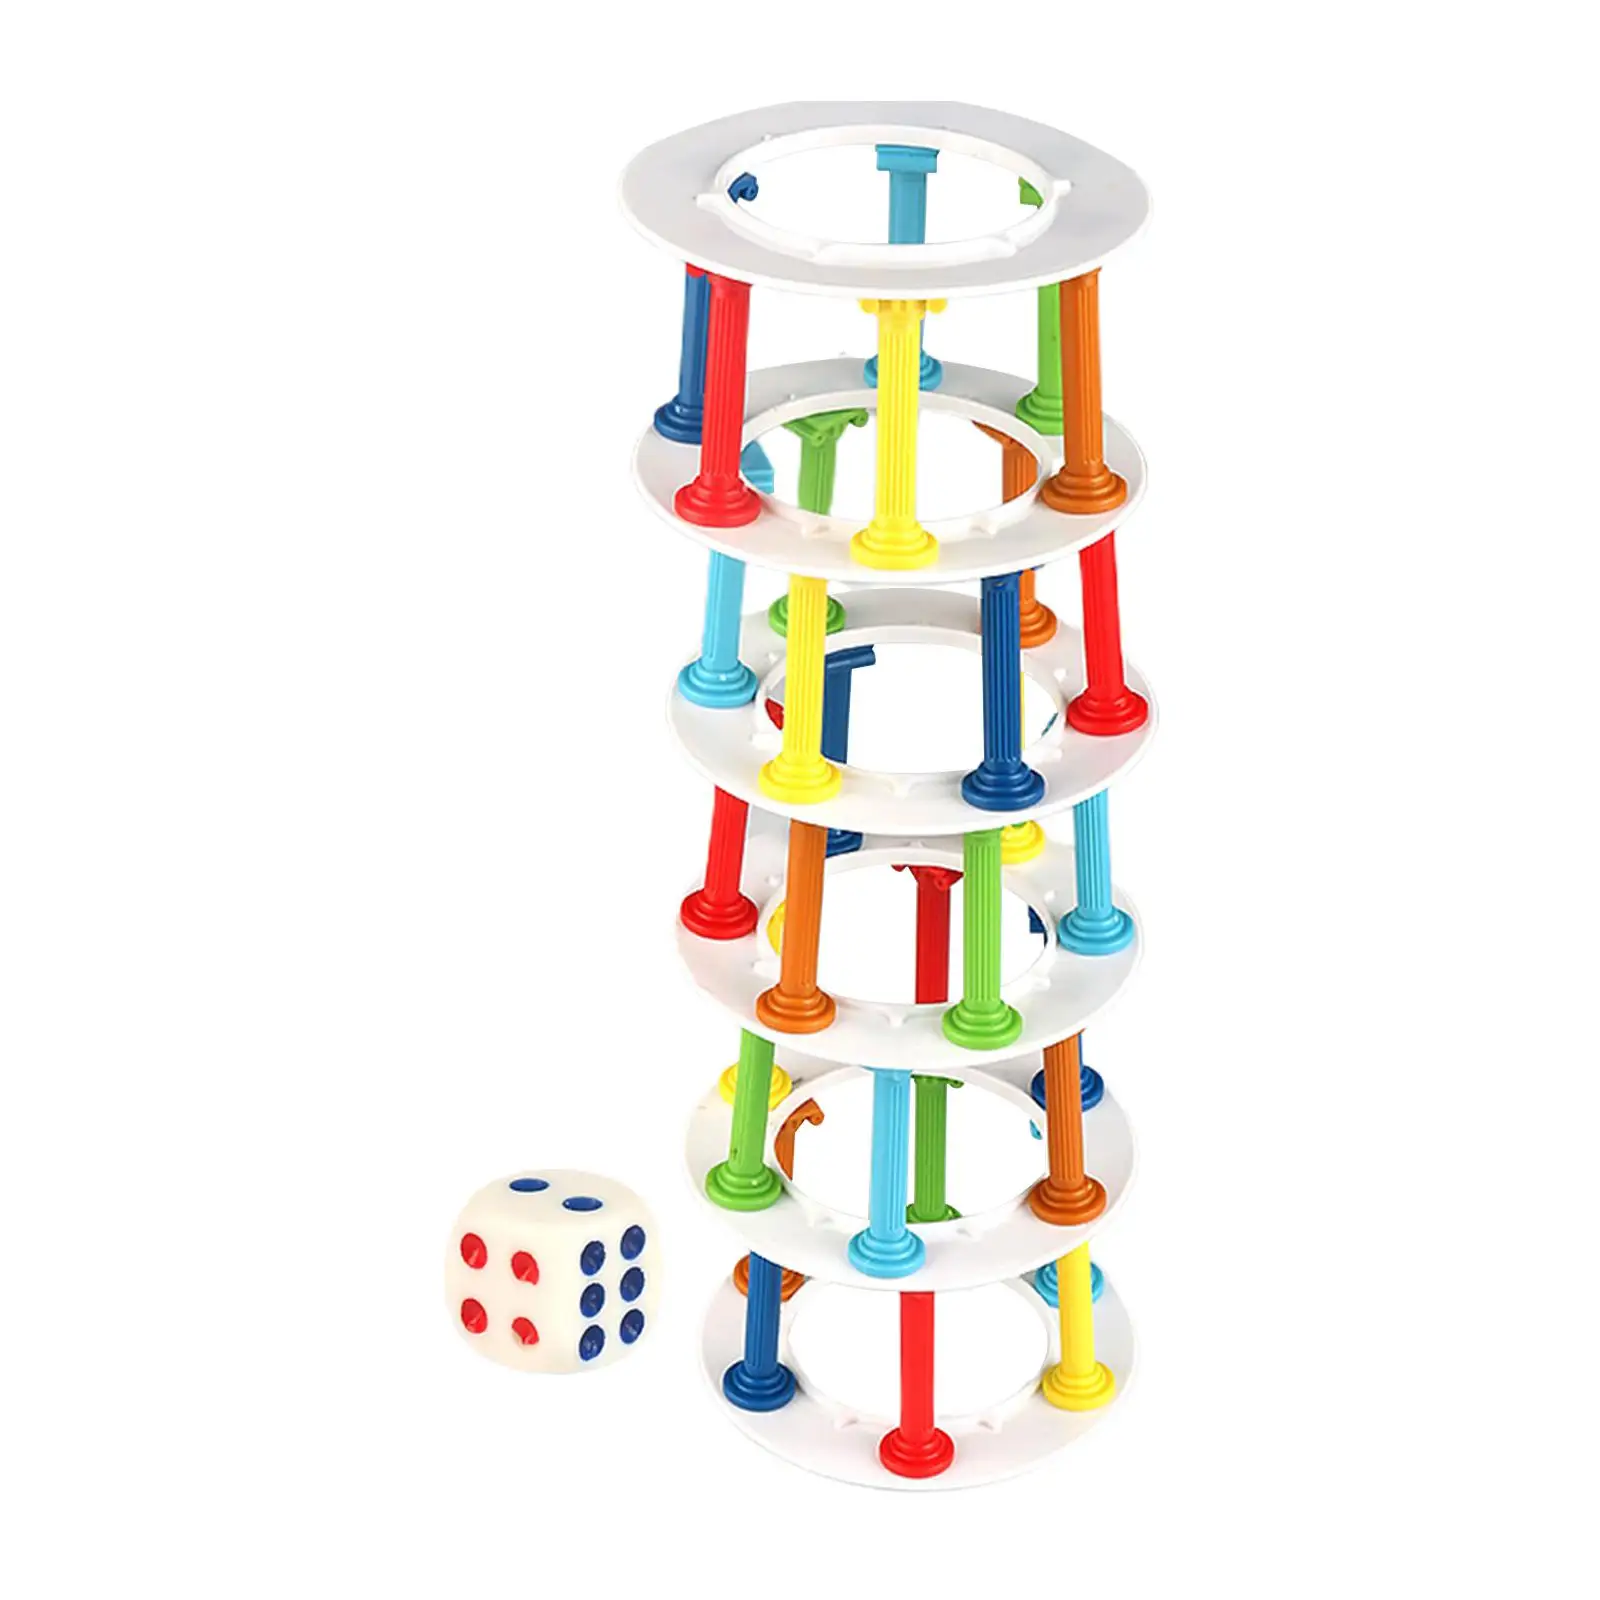 

Tumble Tower Game Game with Dice Educational Toys Balance Game Tumble Tower for Entertaining Party Game Adults Boys Girls